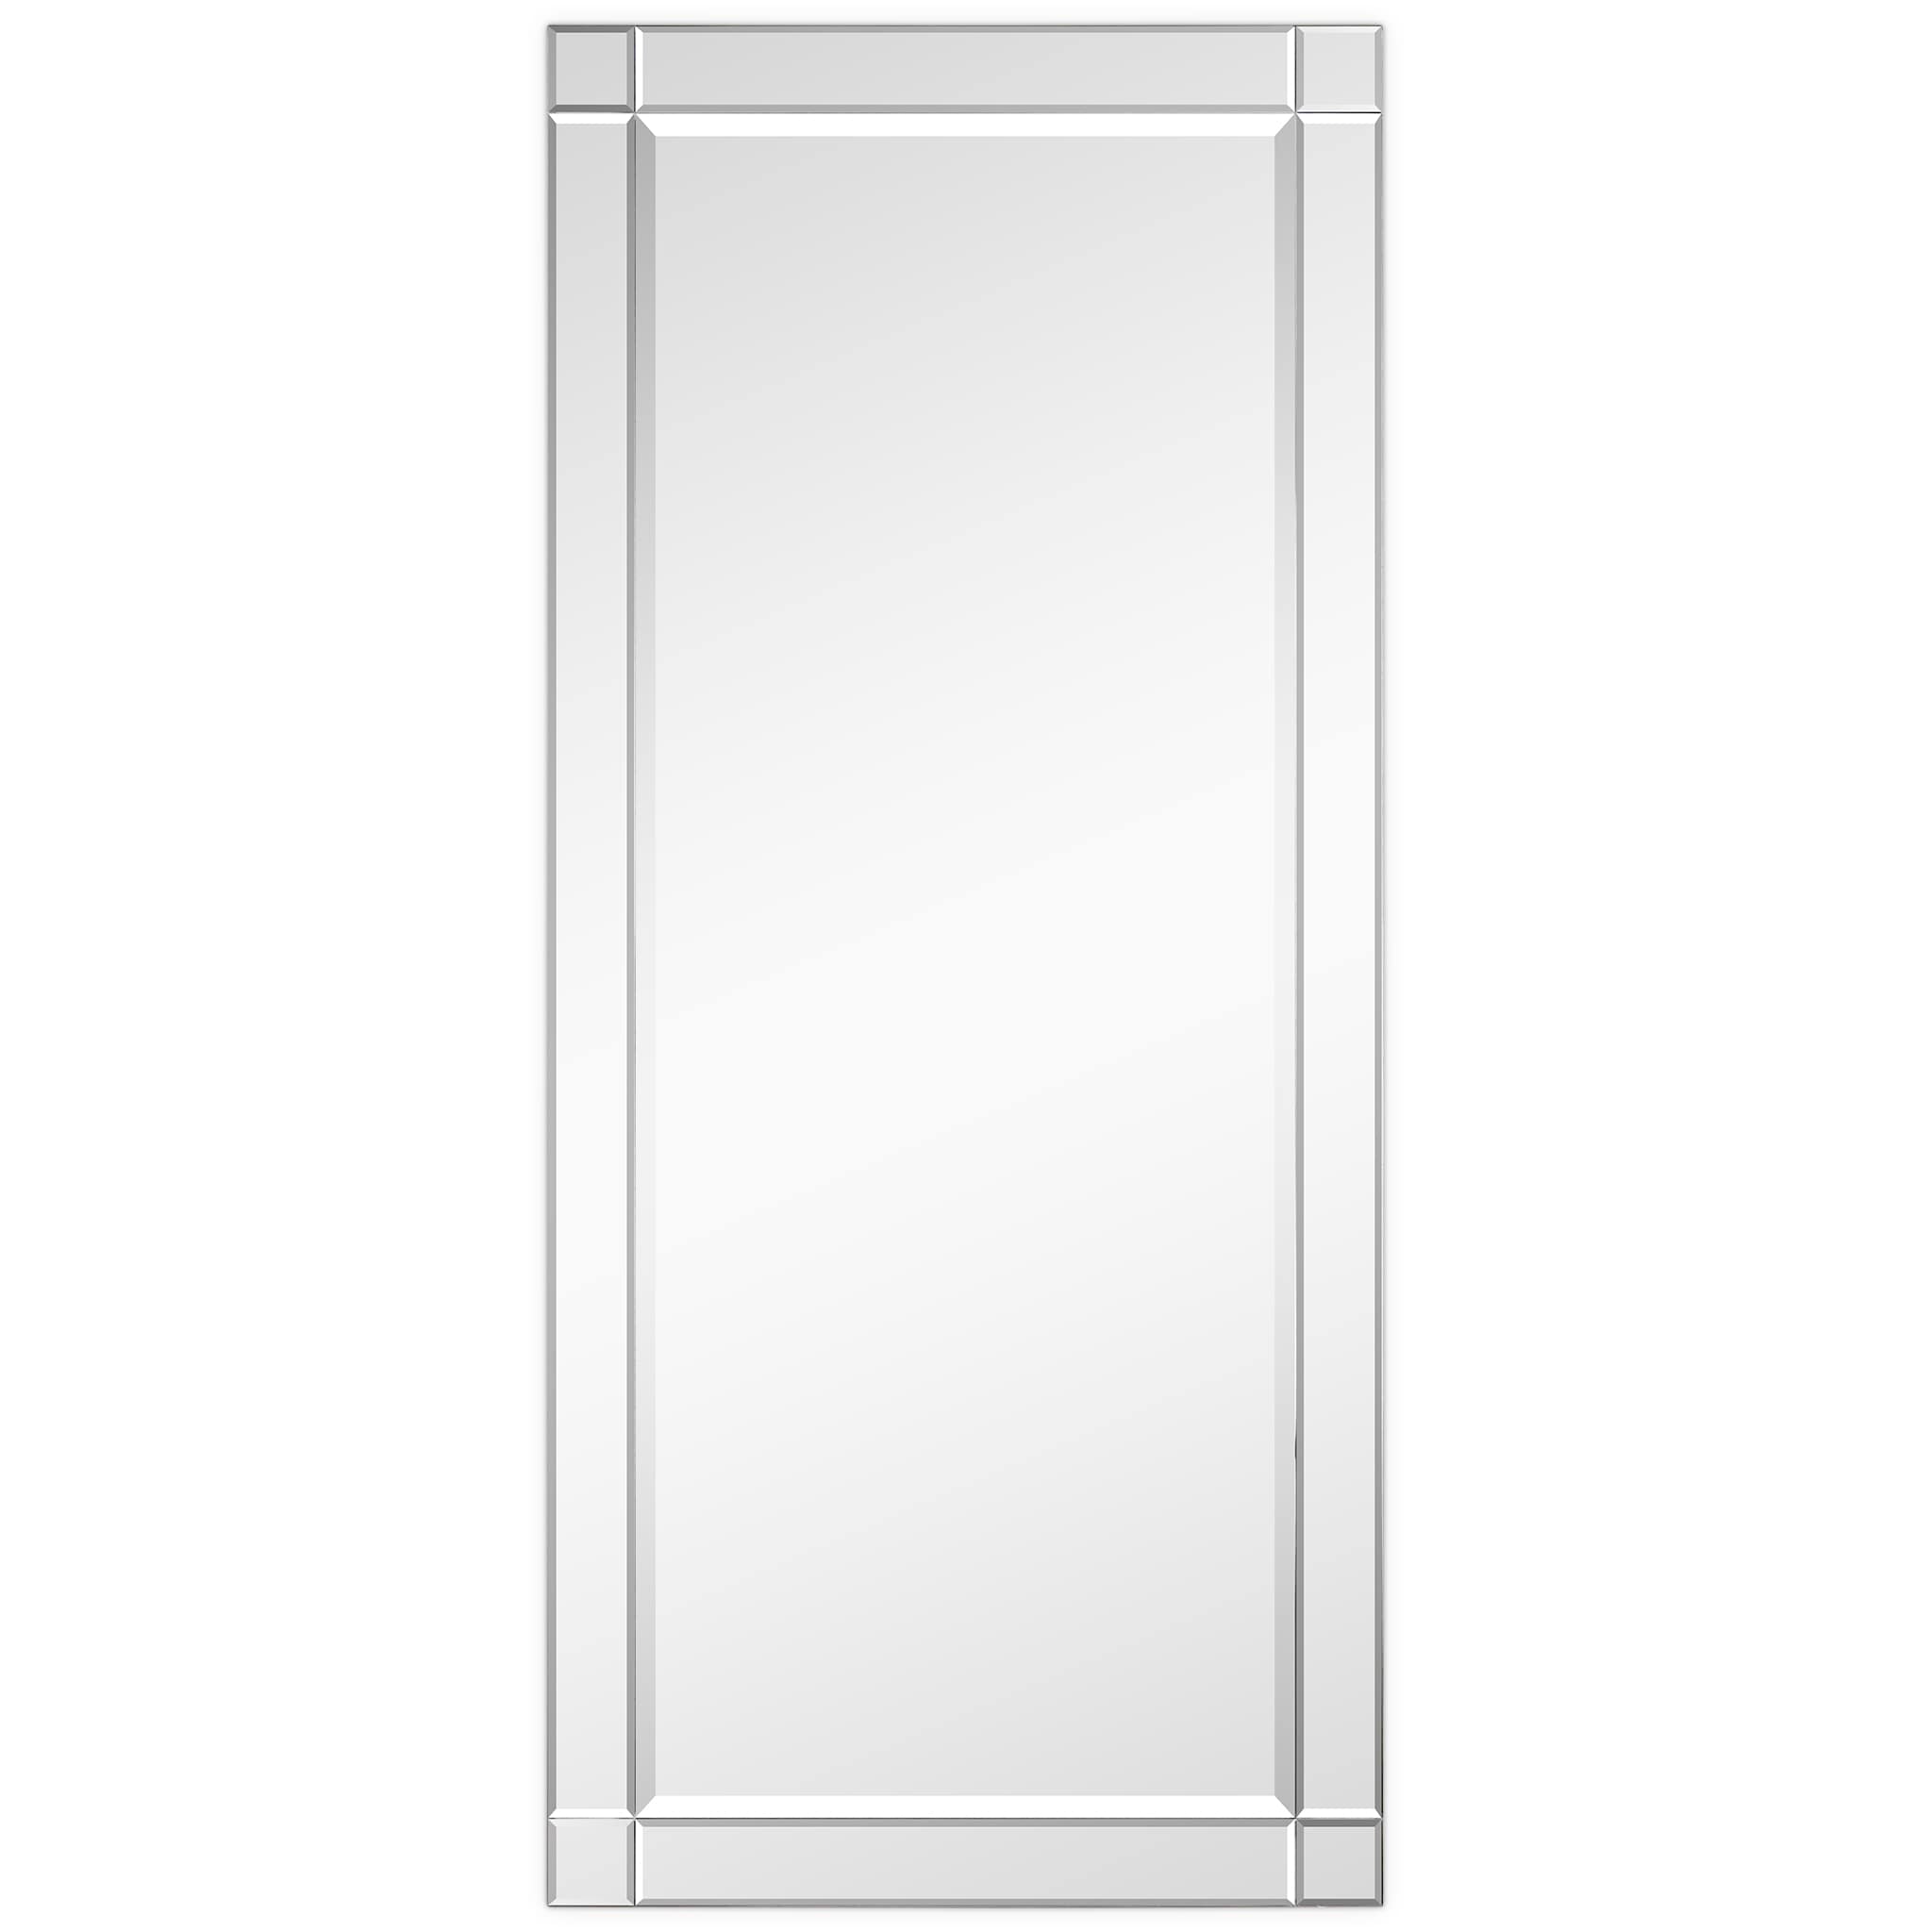 Empire Art Direct Wall mirror 24-in W x 54-in H Clear Beveled Wall Mirror  in the Mirrors department at